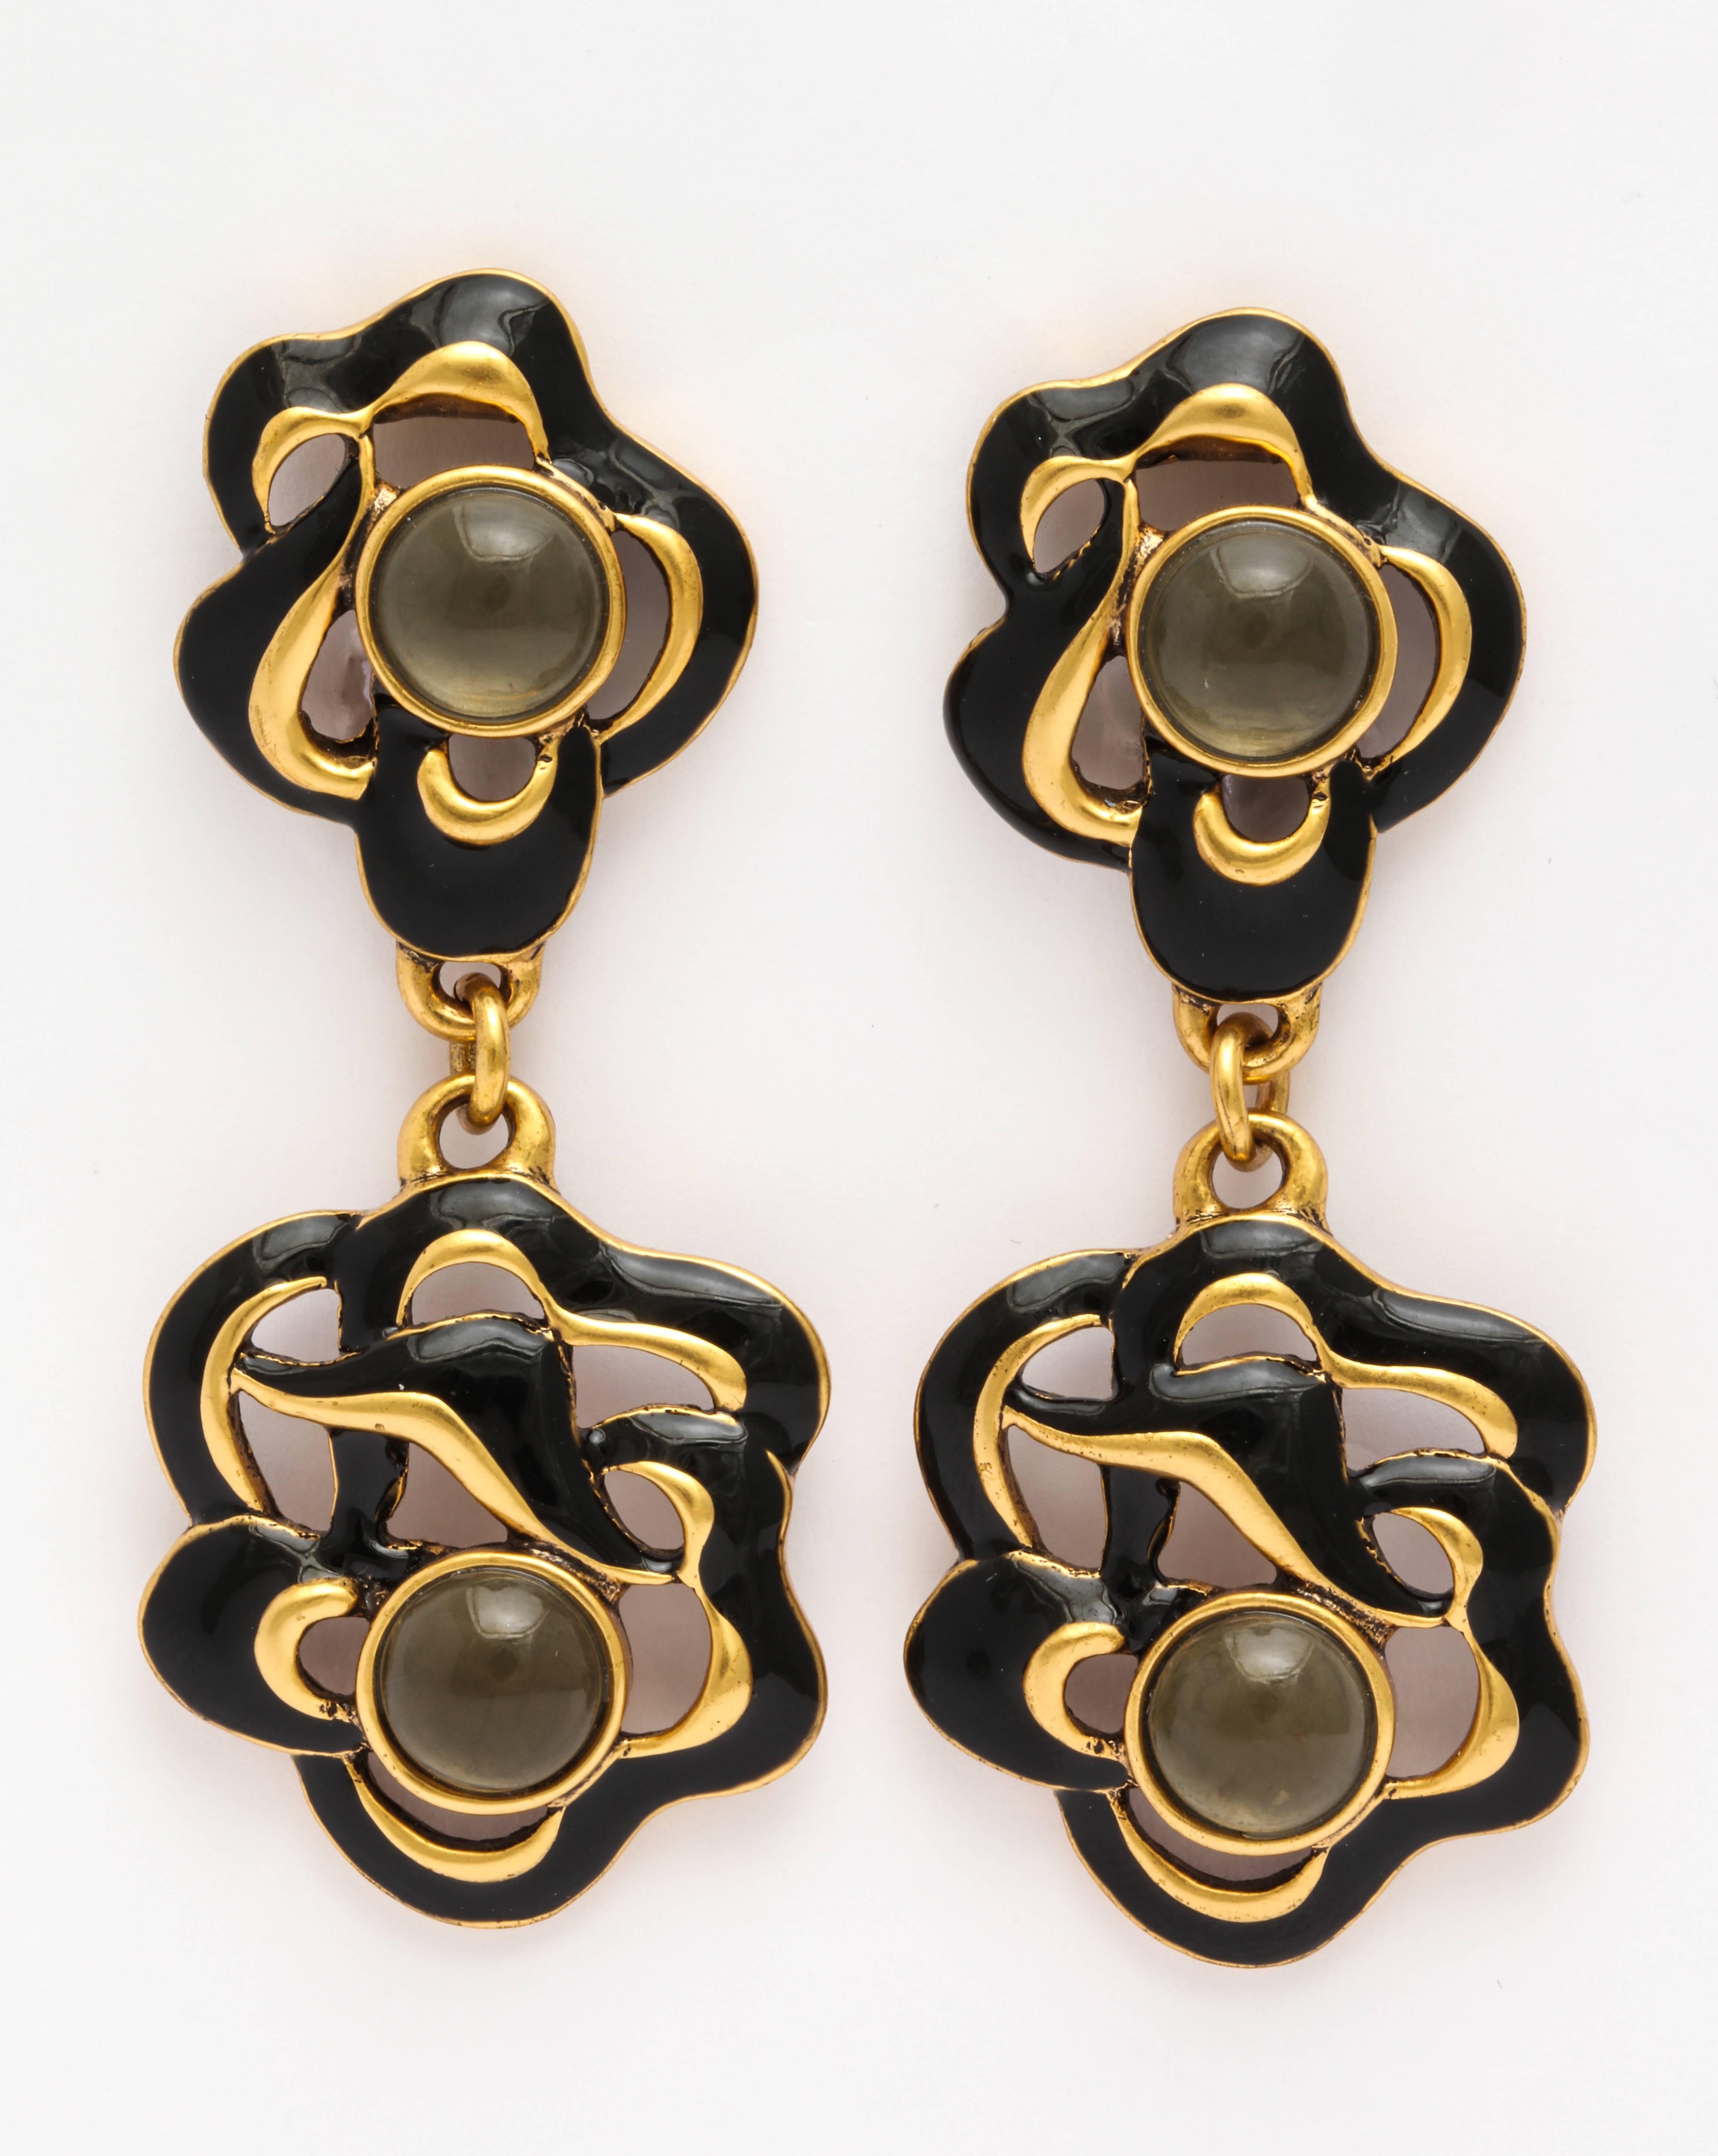 A wonderful pair of vintage signed Oscar de la Renta drop earrings in enamel and gold with smokey poured glass cabochon centers